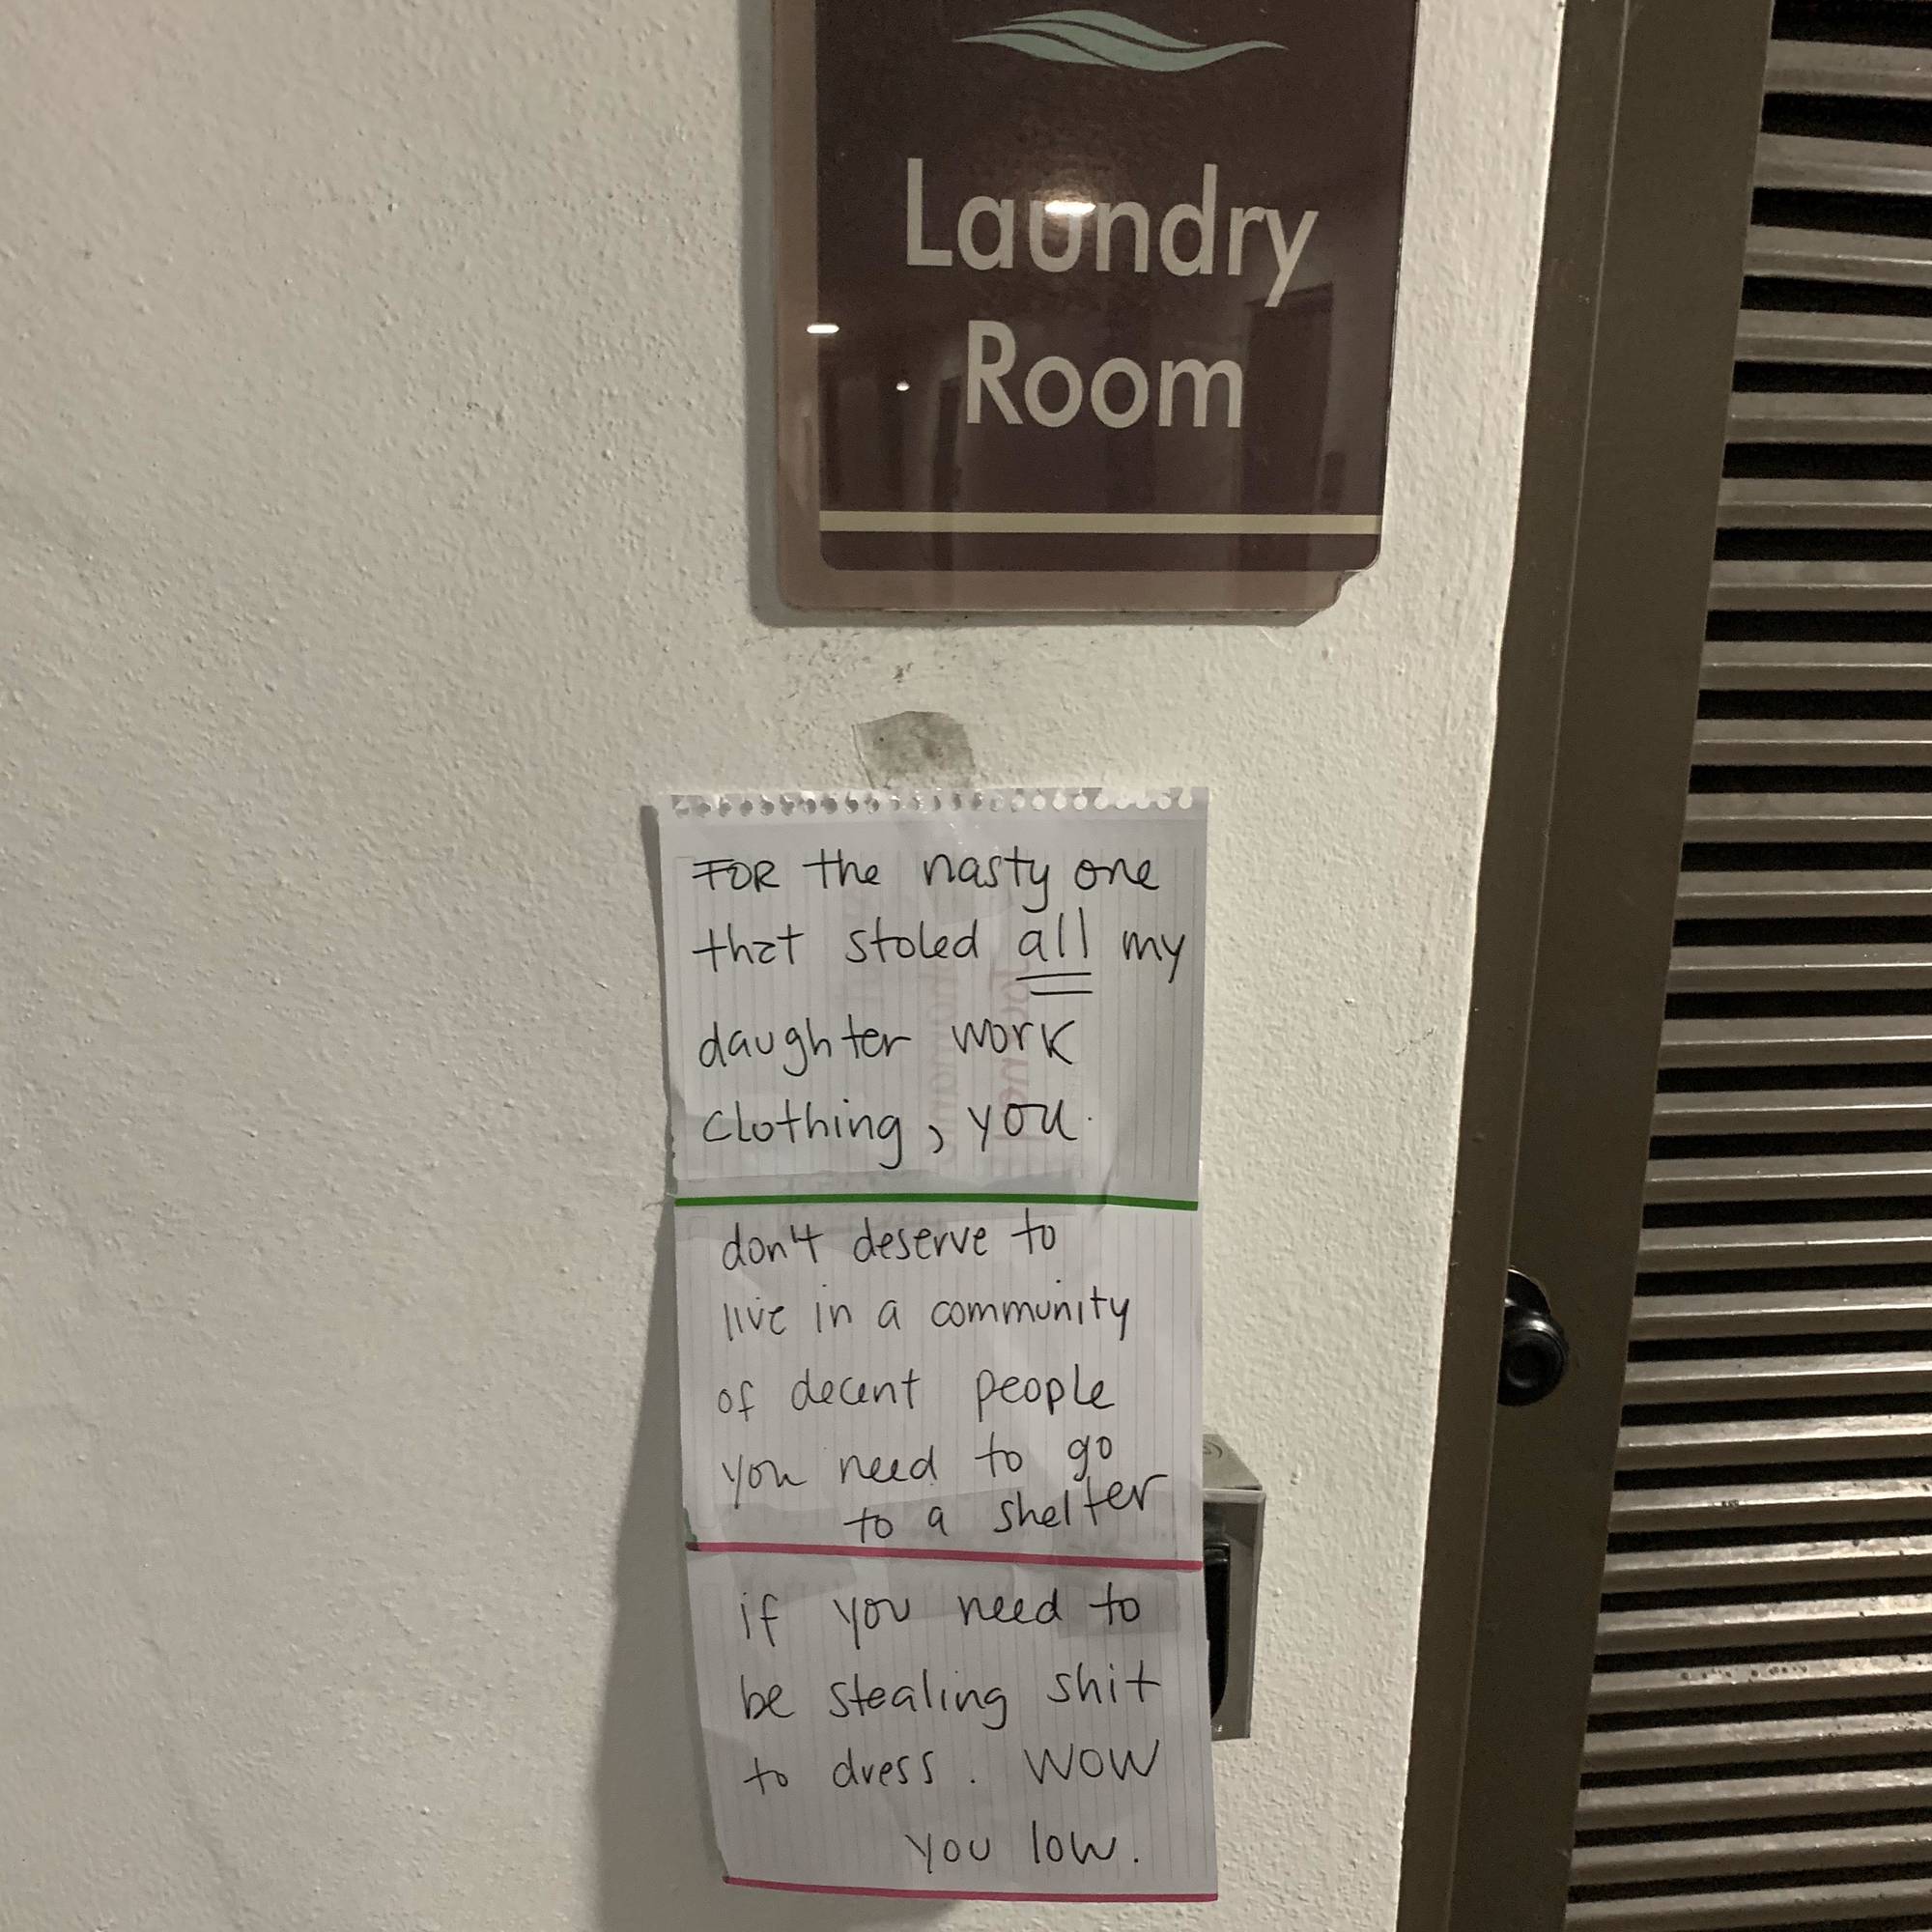 signage - Laundry Room For the nasty one that stoled all my daughter work Clothing, you don't deserve to live in a community of decent people you need to go to a shelter if you need to be stealing shit to dress. Wow a you low.